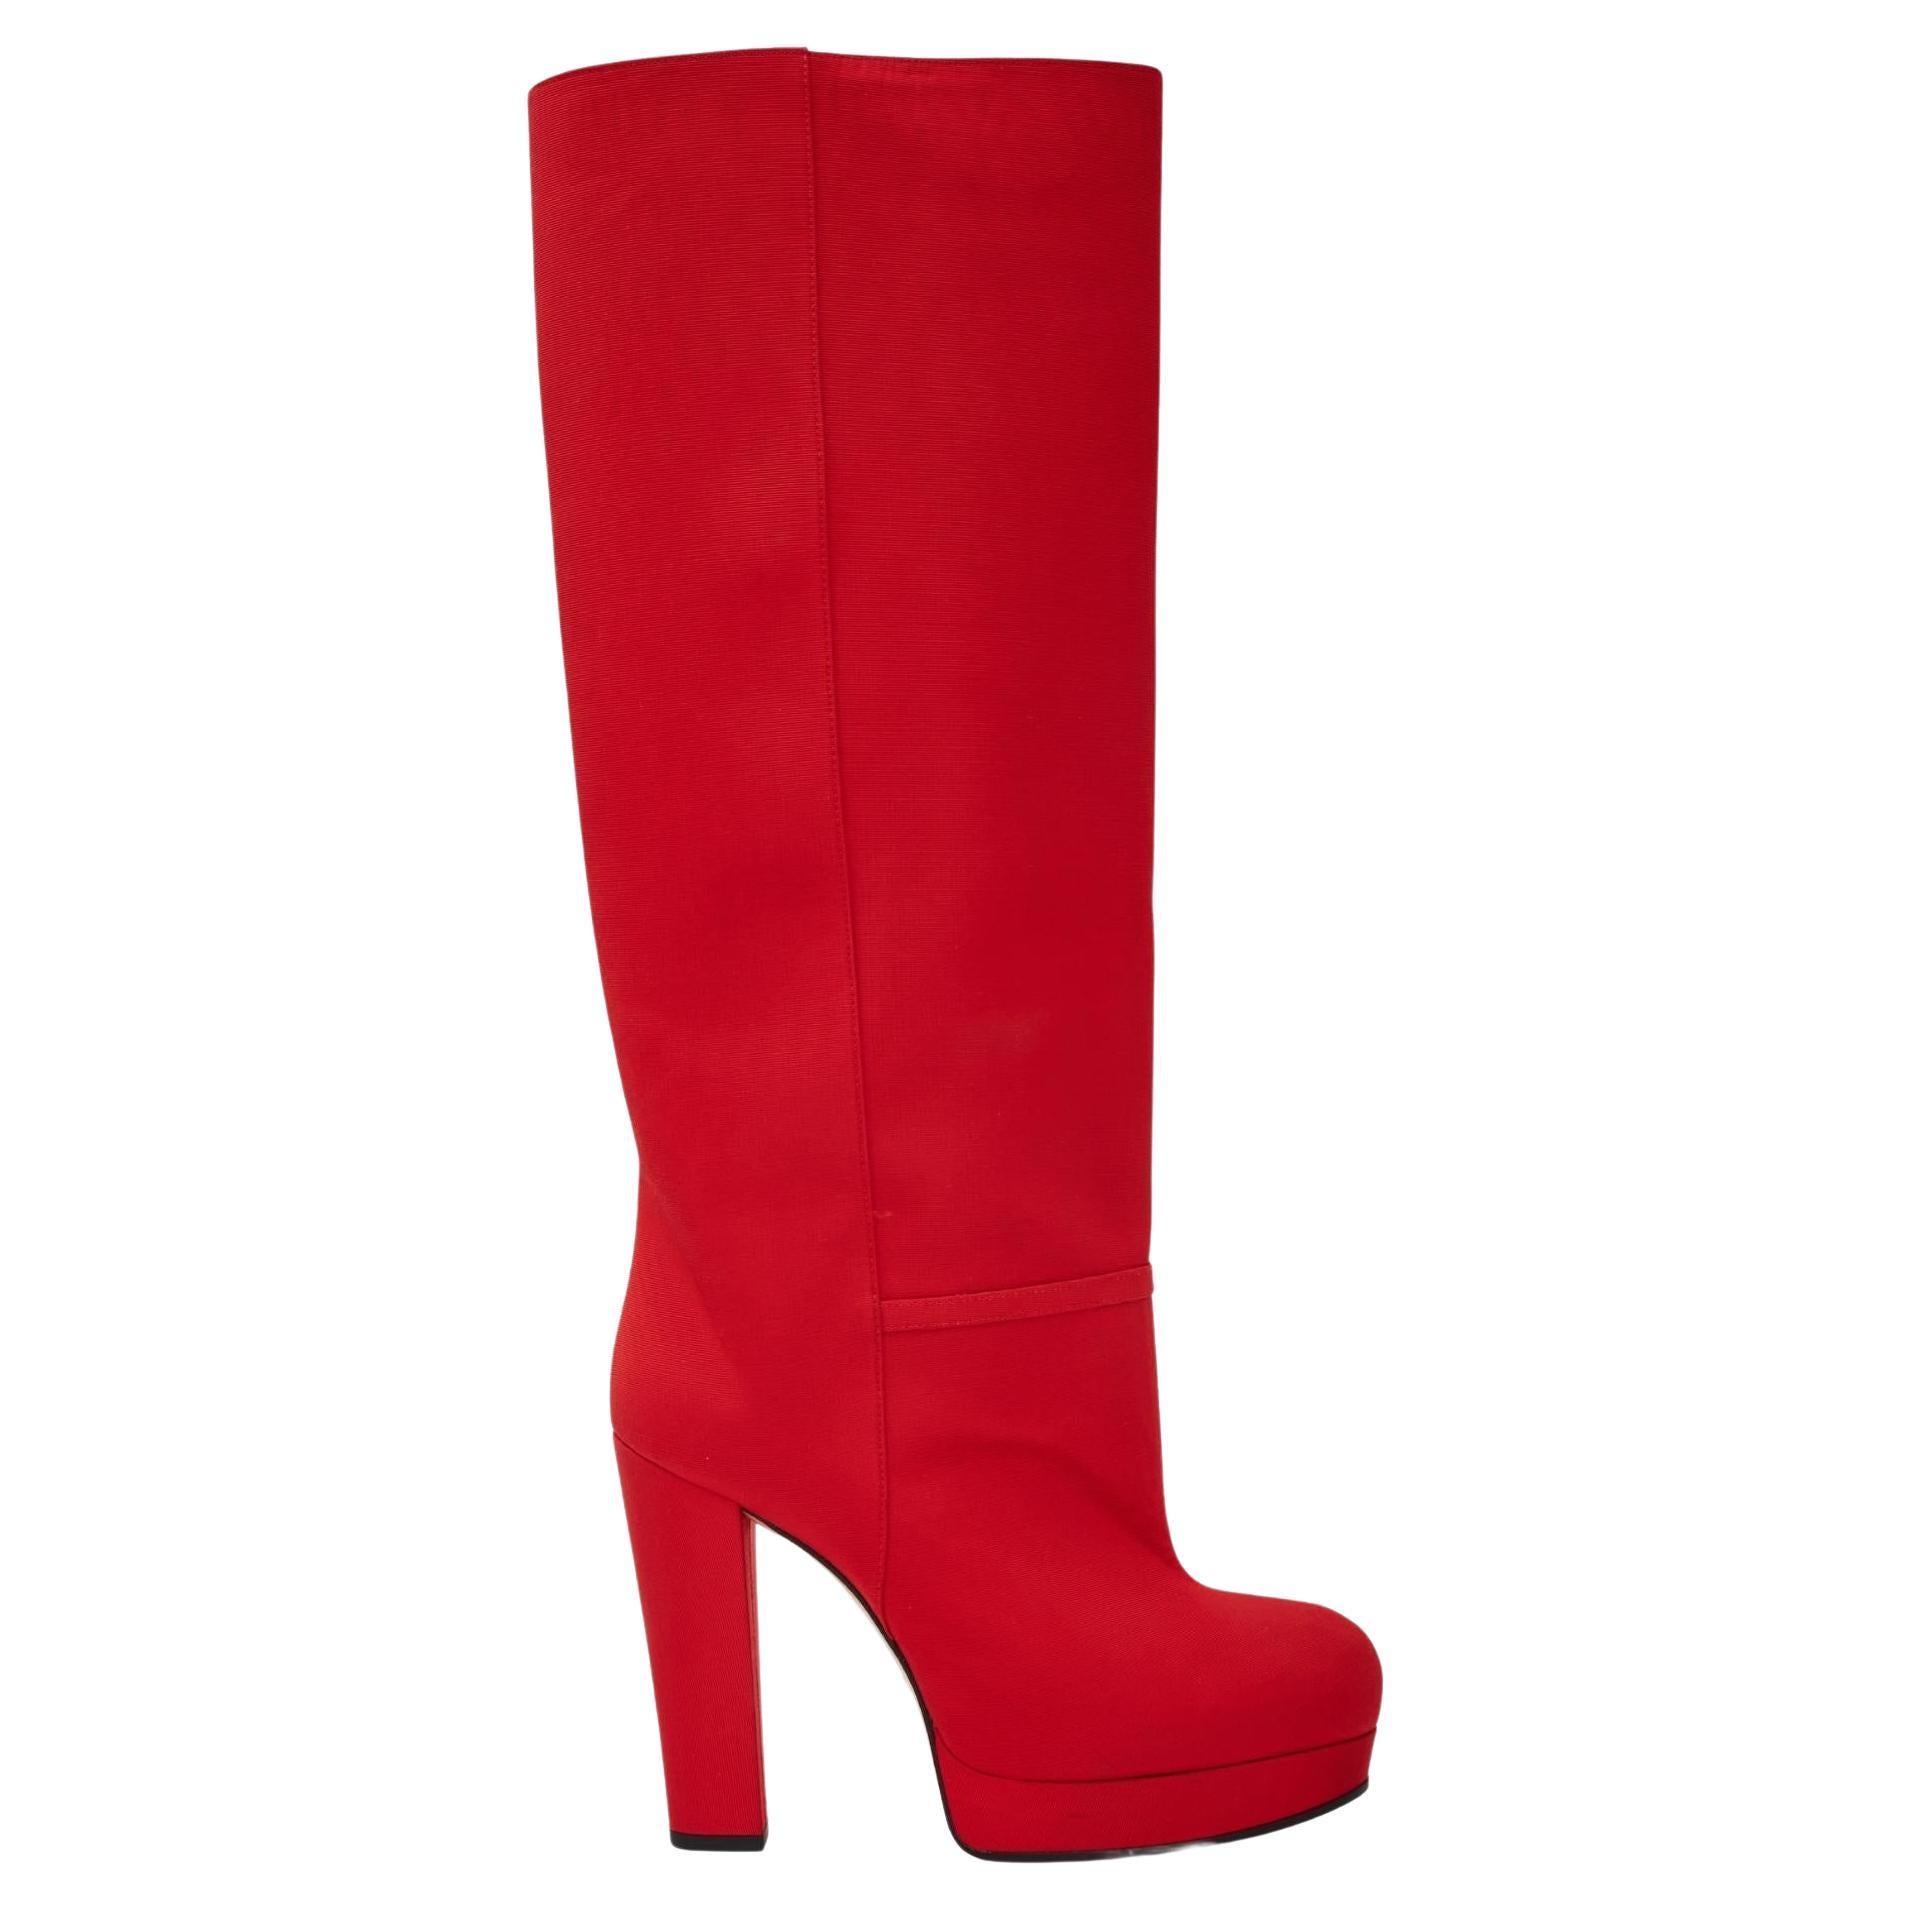 Gucci Ribbed Fabric Red Platform Knee High Boots (588968) 38.5 EU For Sale